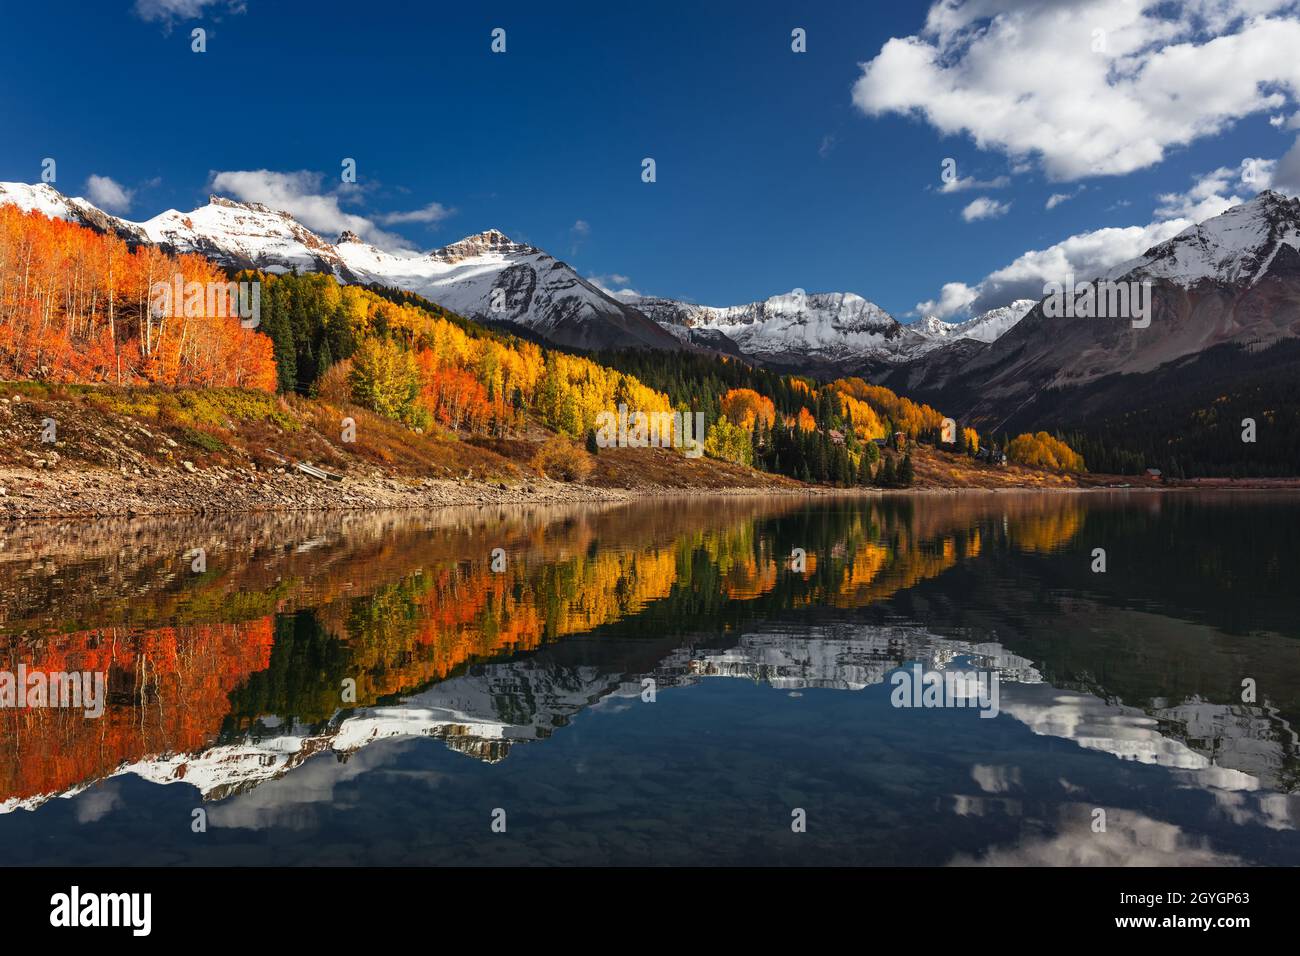 Scenic autumn landscape with golden Aspen trees reflecting in the waters of Trout Lake in the San Juan Mountains near Telluride, Colorado Stock Photo